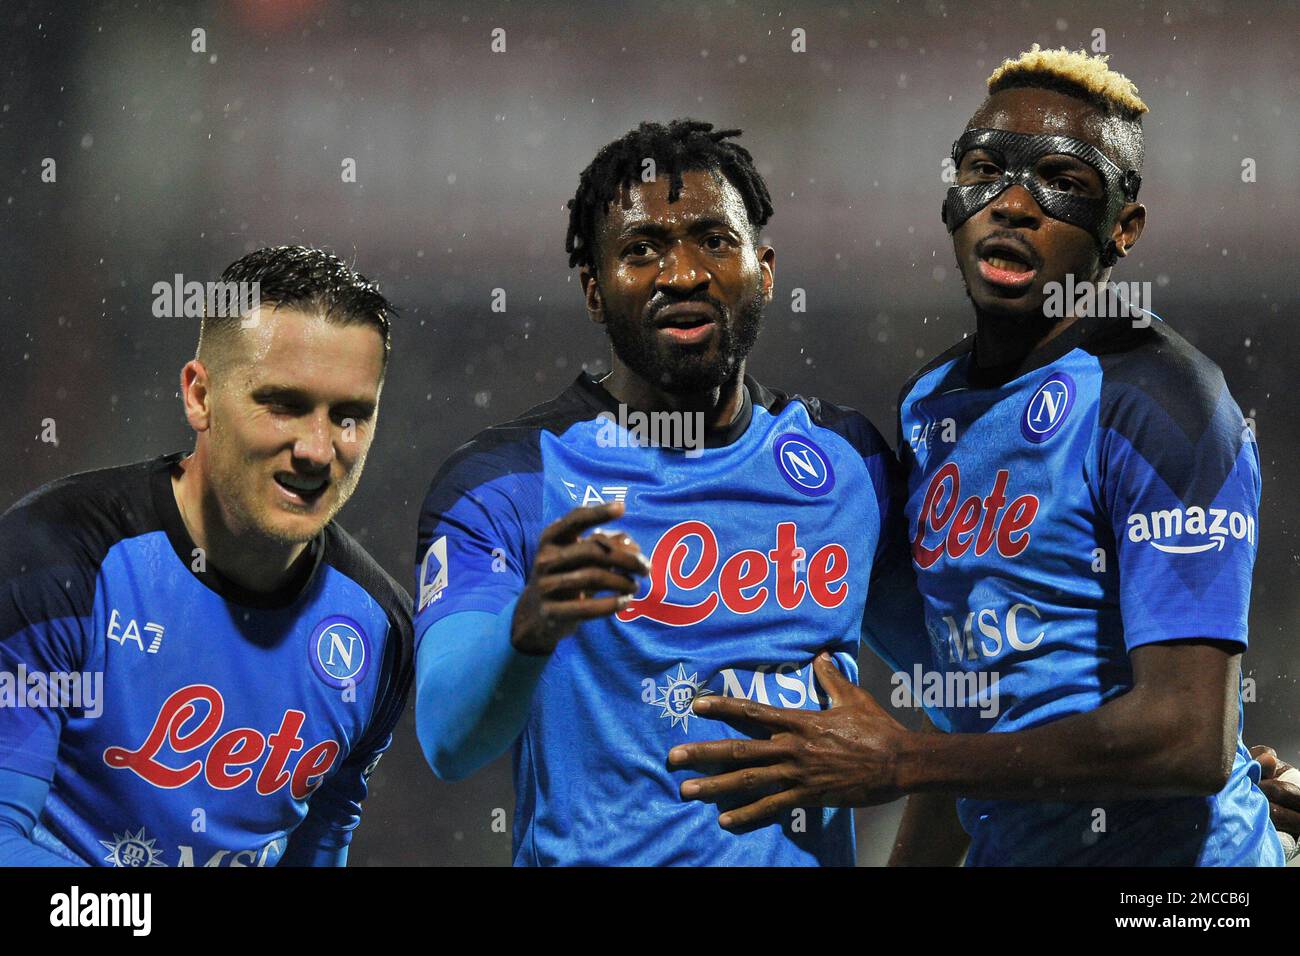 Victor Osimhen, André-Frank Zambo Anguissa and Piotr Zieliński players of  Napoli, during the match of the Italian Serie A league between Salernitana  vs Napoli final result, Salernitana 0, Napoli 2, match played